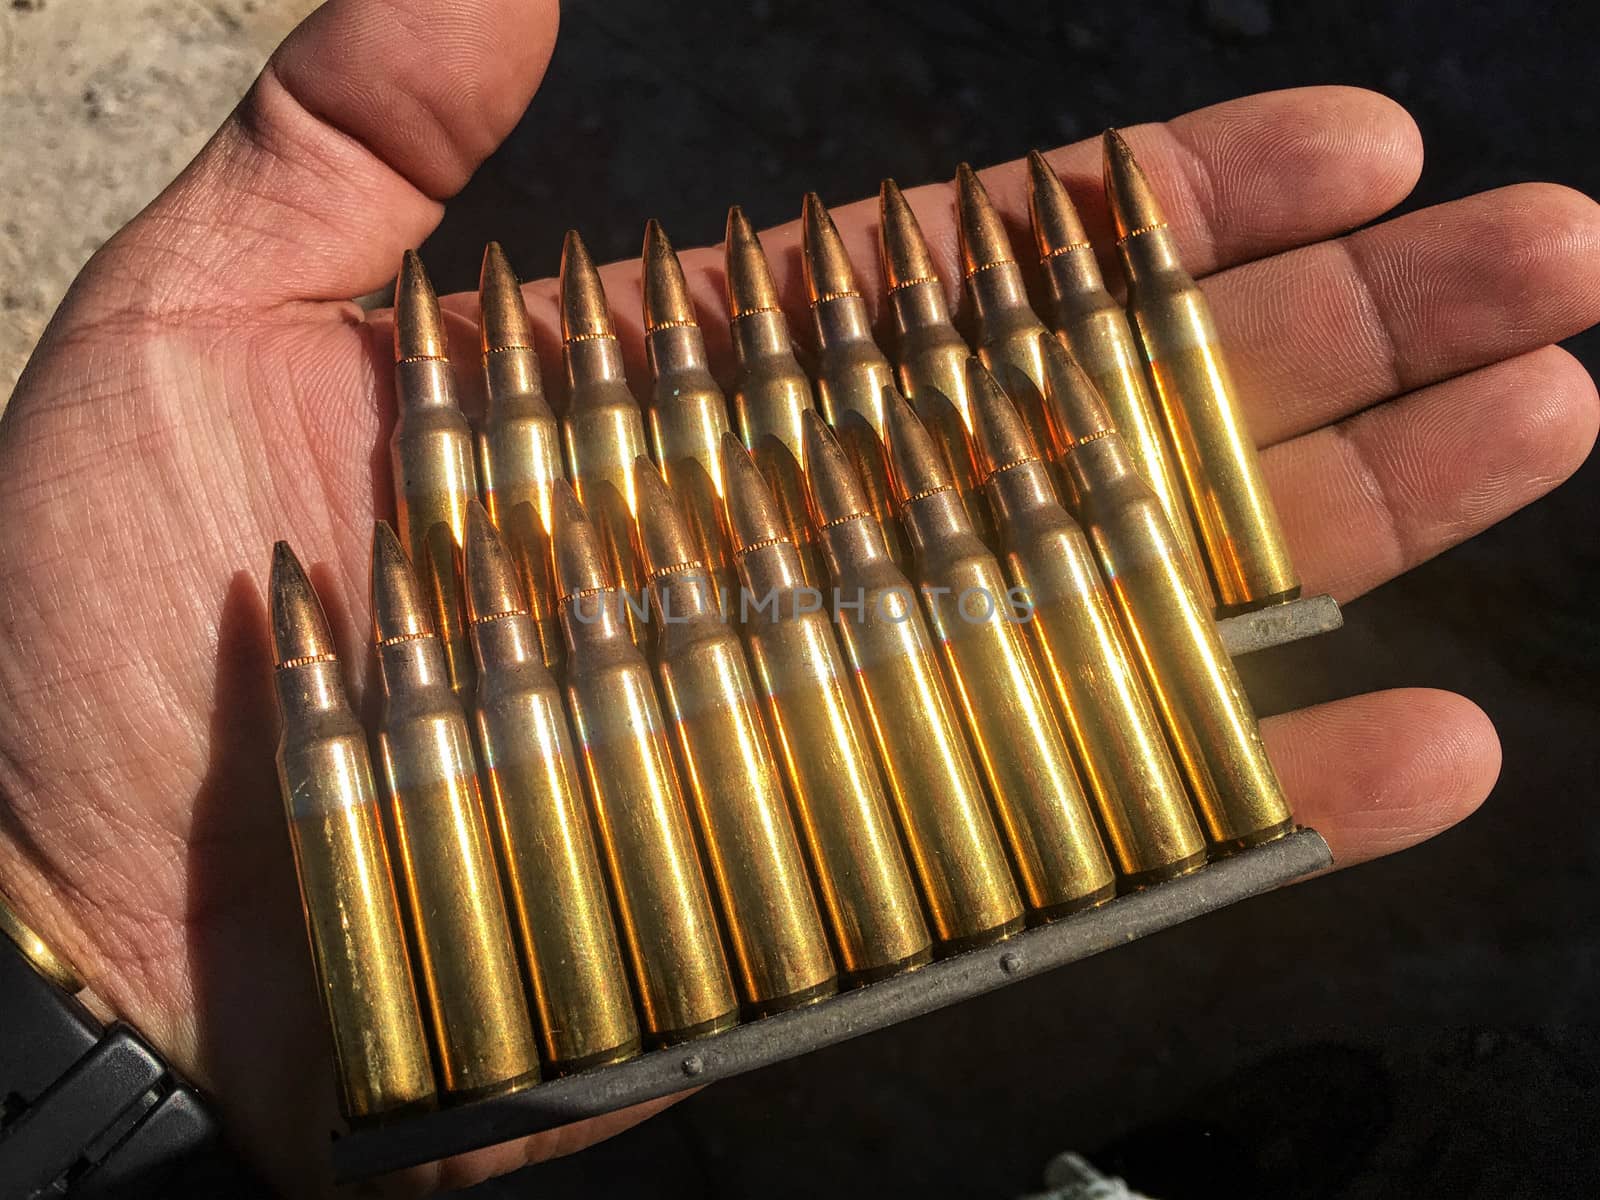 The 5.56×45mm ammo by e22xua